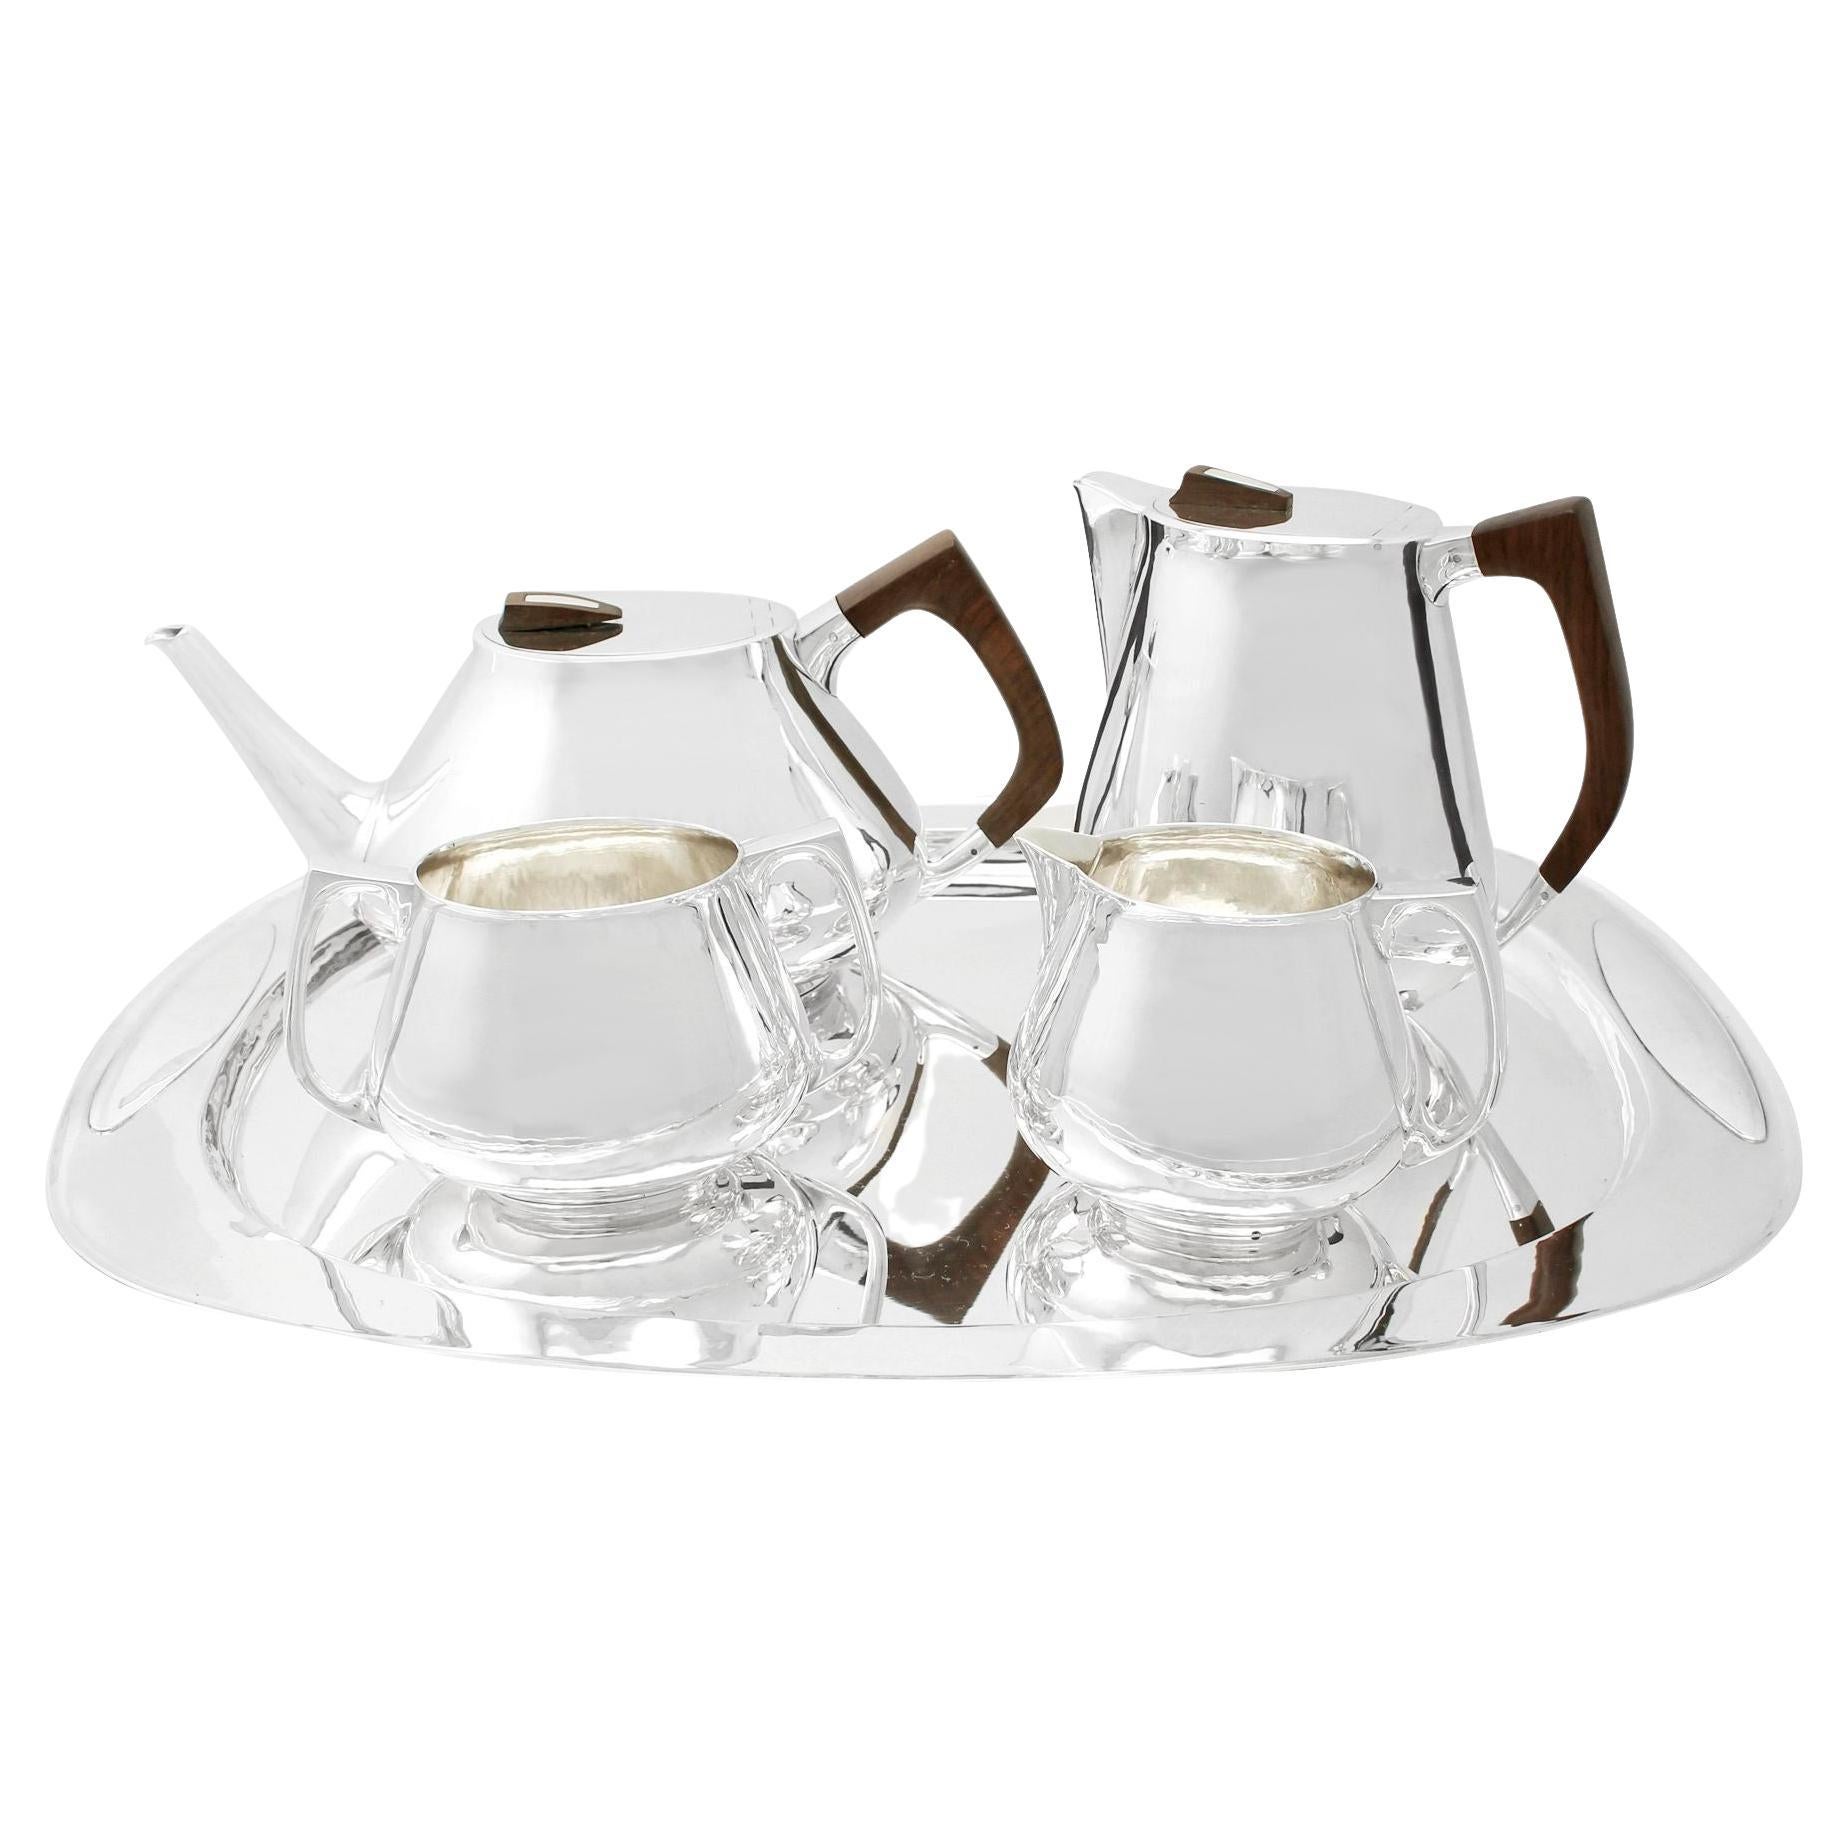 Sterling Silver Tea / Coffee Service with Tray, Design Style